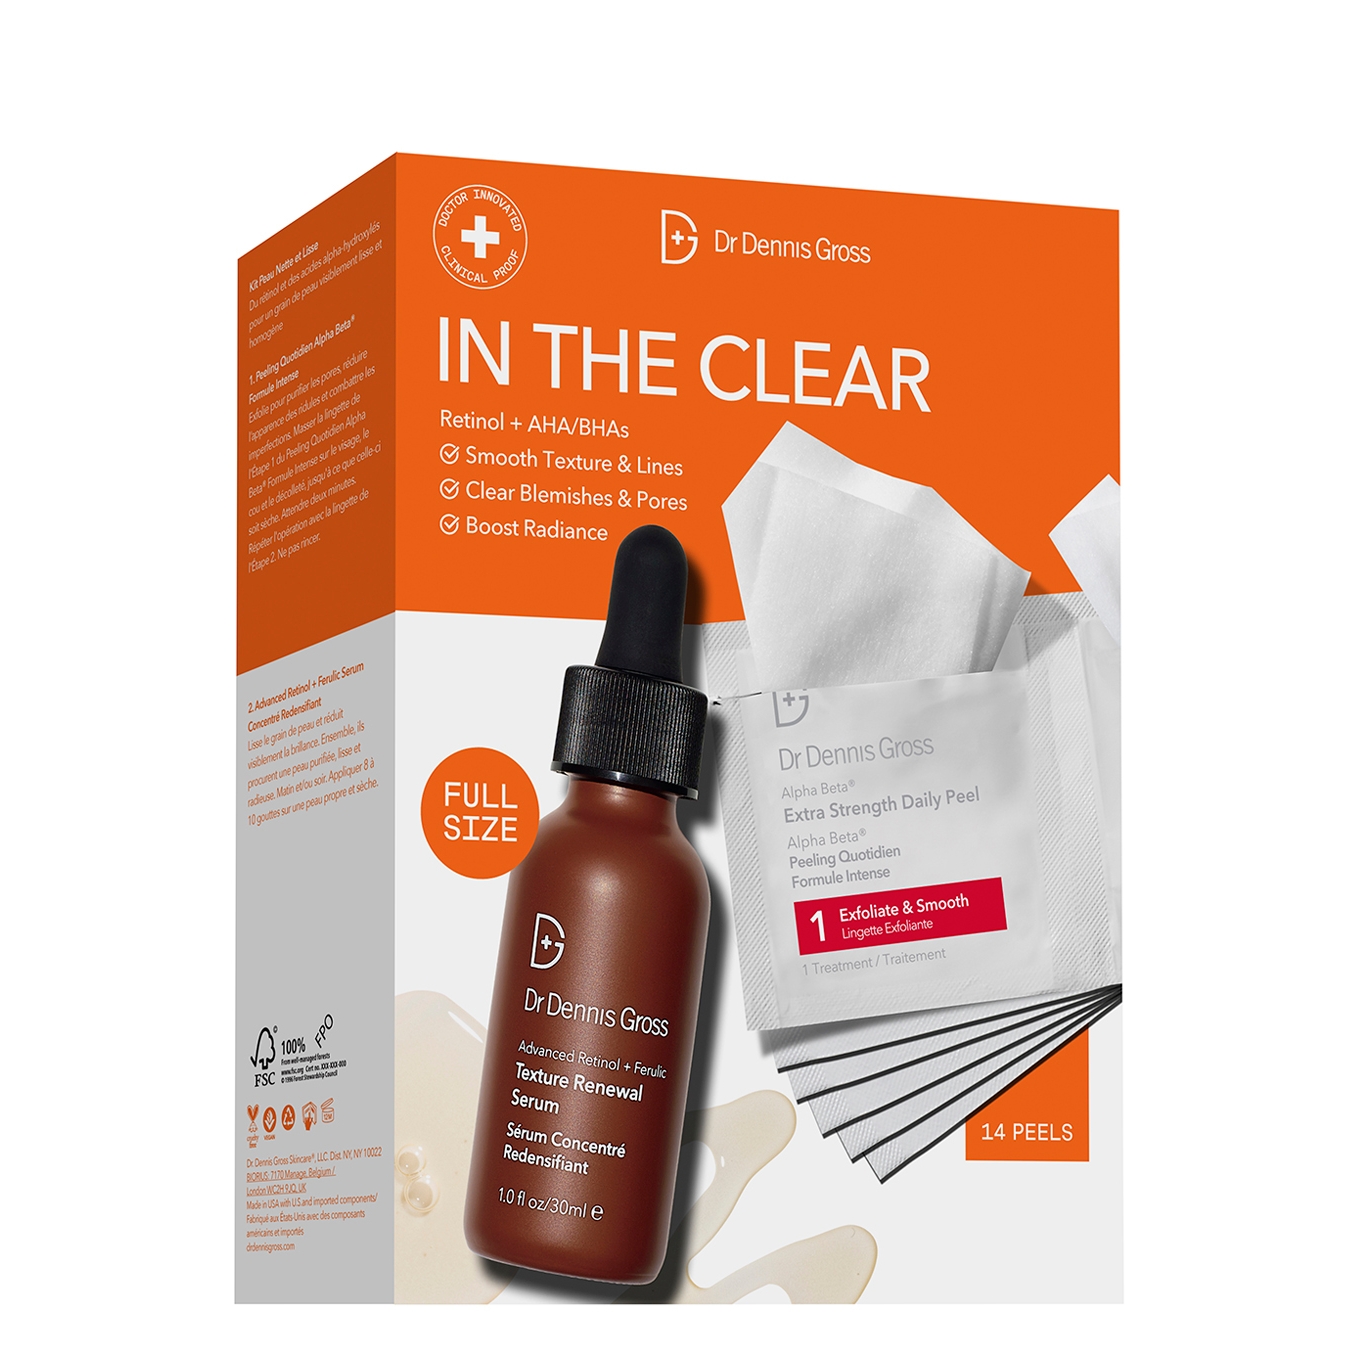 Dr. Dennis Gross Skincare In The Clear Kit